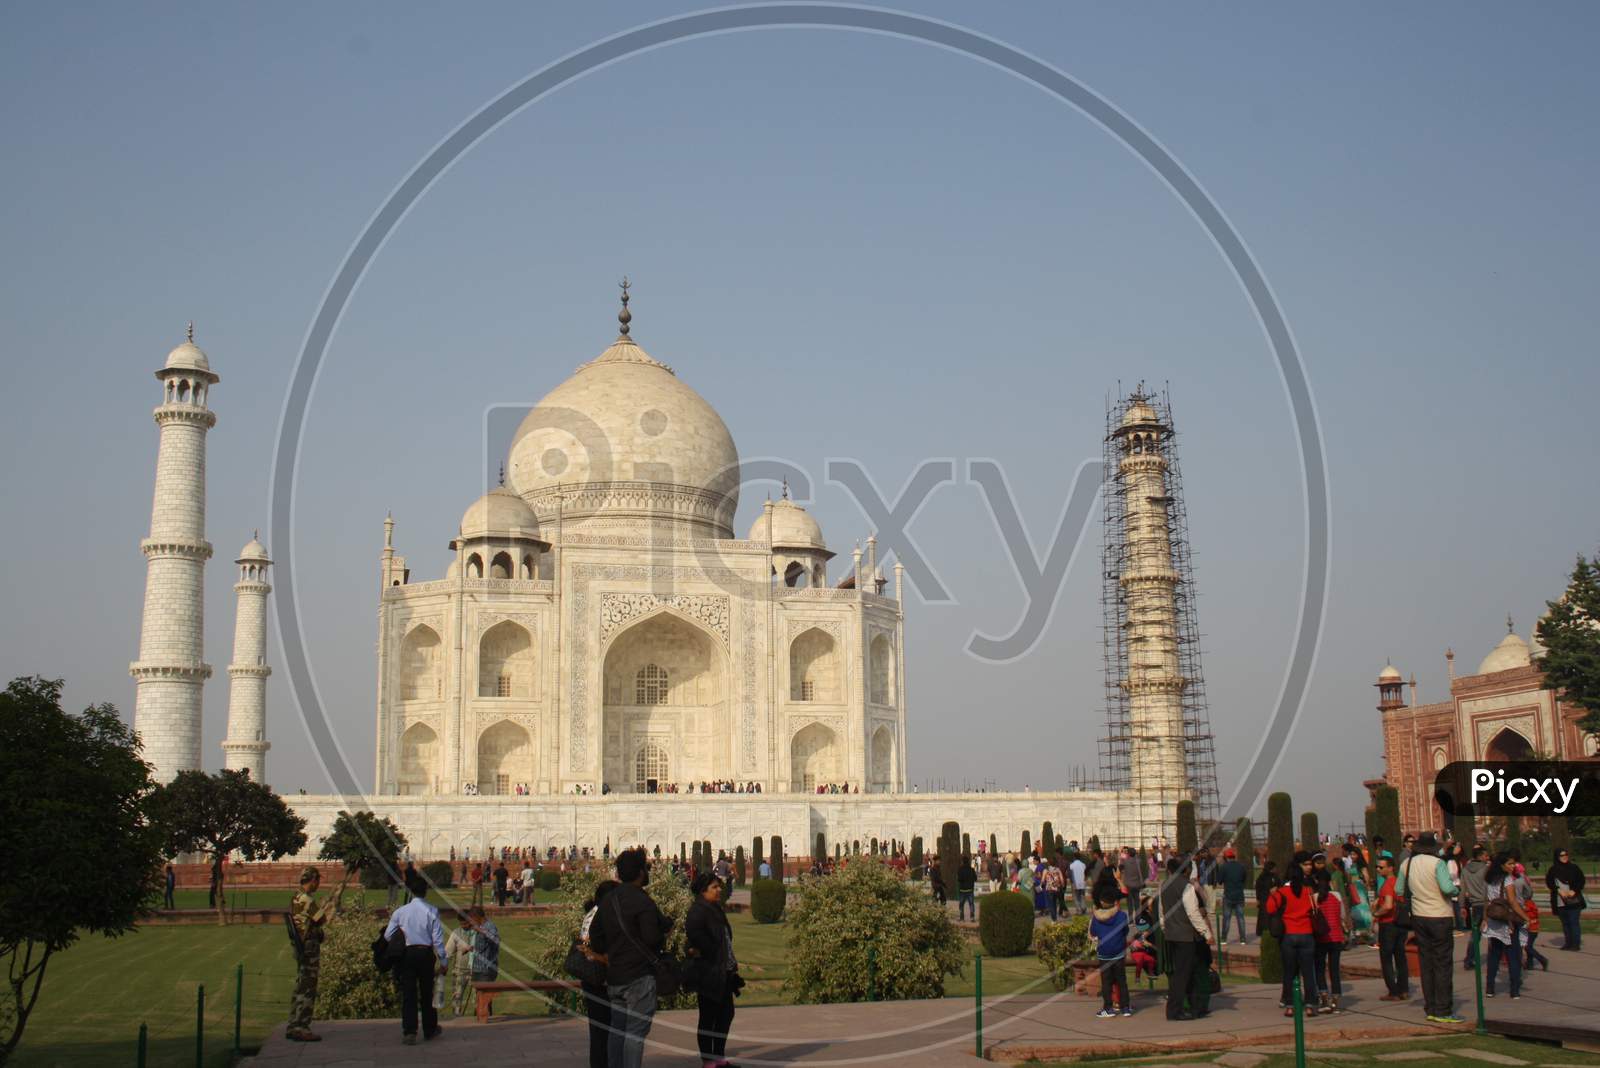 a view of the famous Taj Mahal, a white marble mausoleum